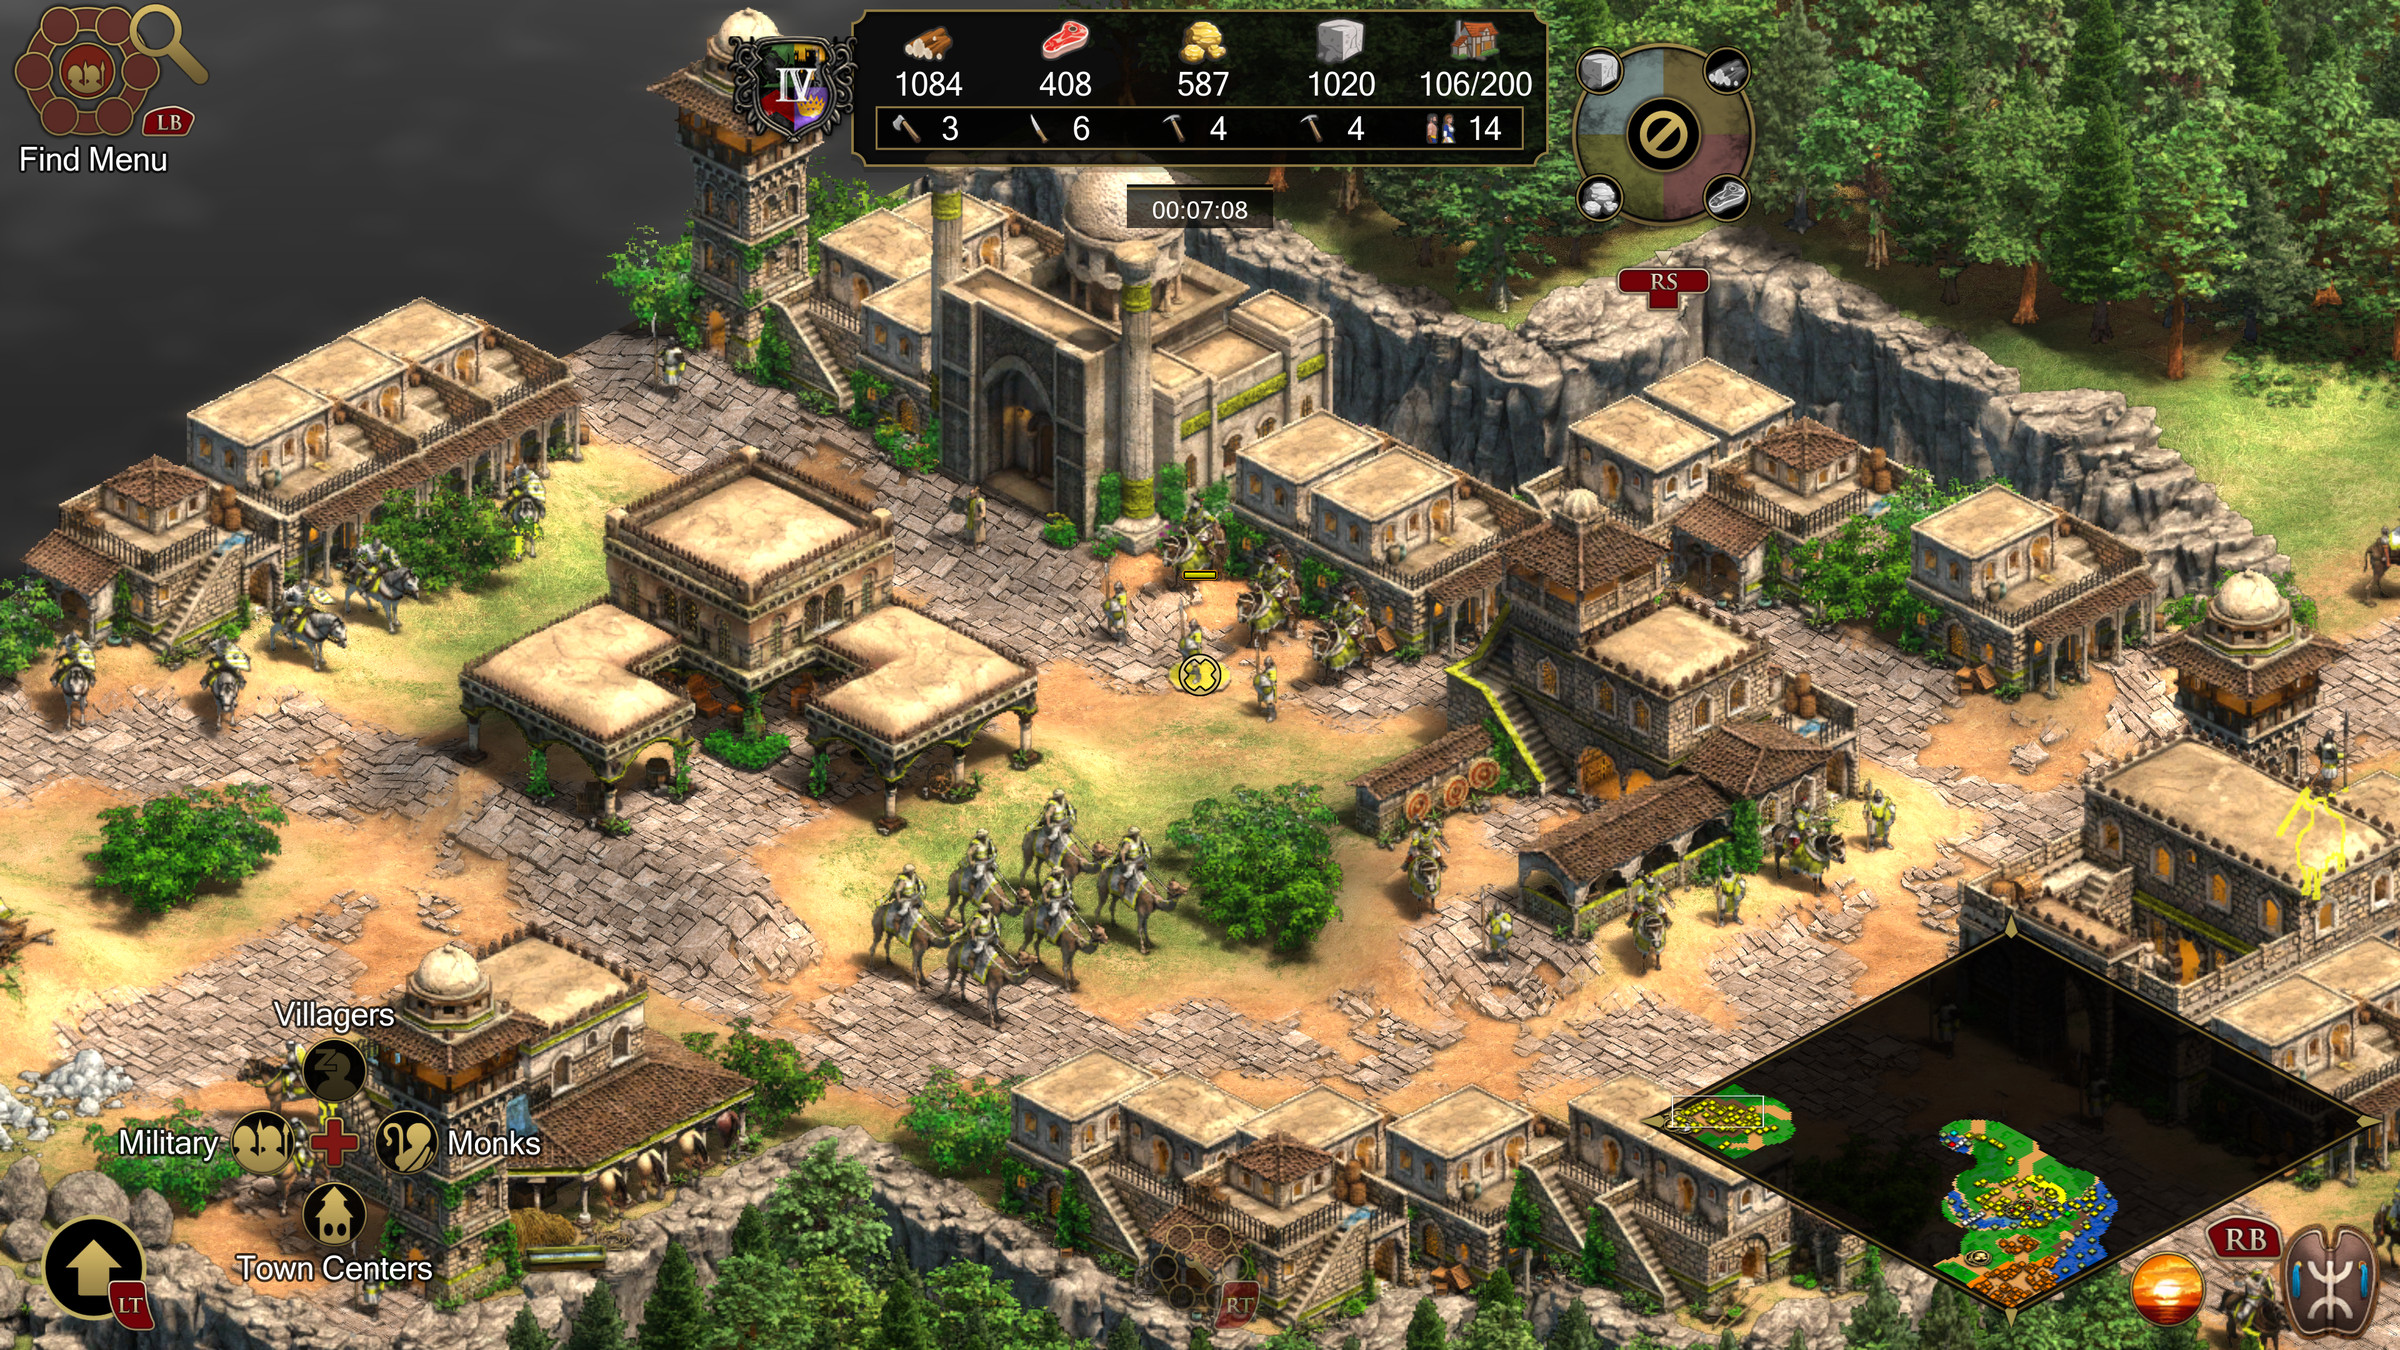 Screenshot of Age of Empires II: Definitive Edition with the Berber civilization.